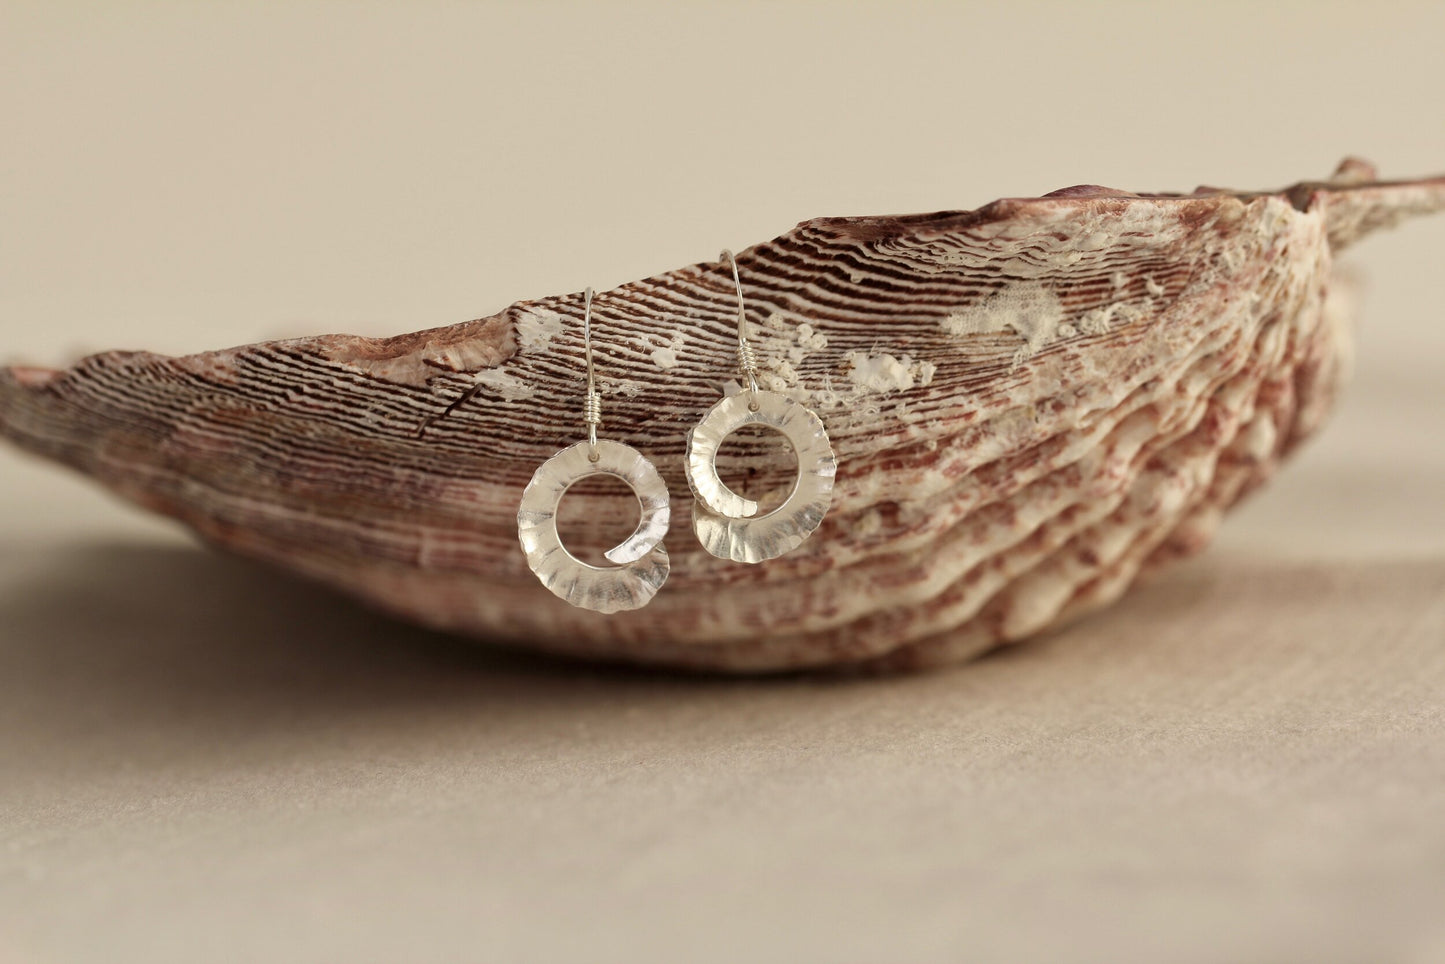 Gail Open Round Earrings - Sterling Silver - The Bristol Artisan Handmade Sustainable Gifts and Homewares.